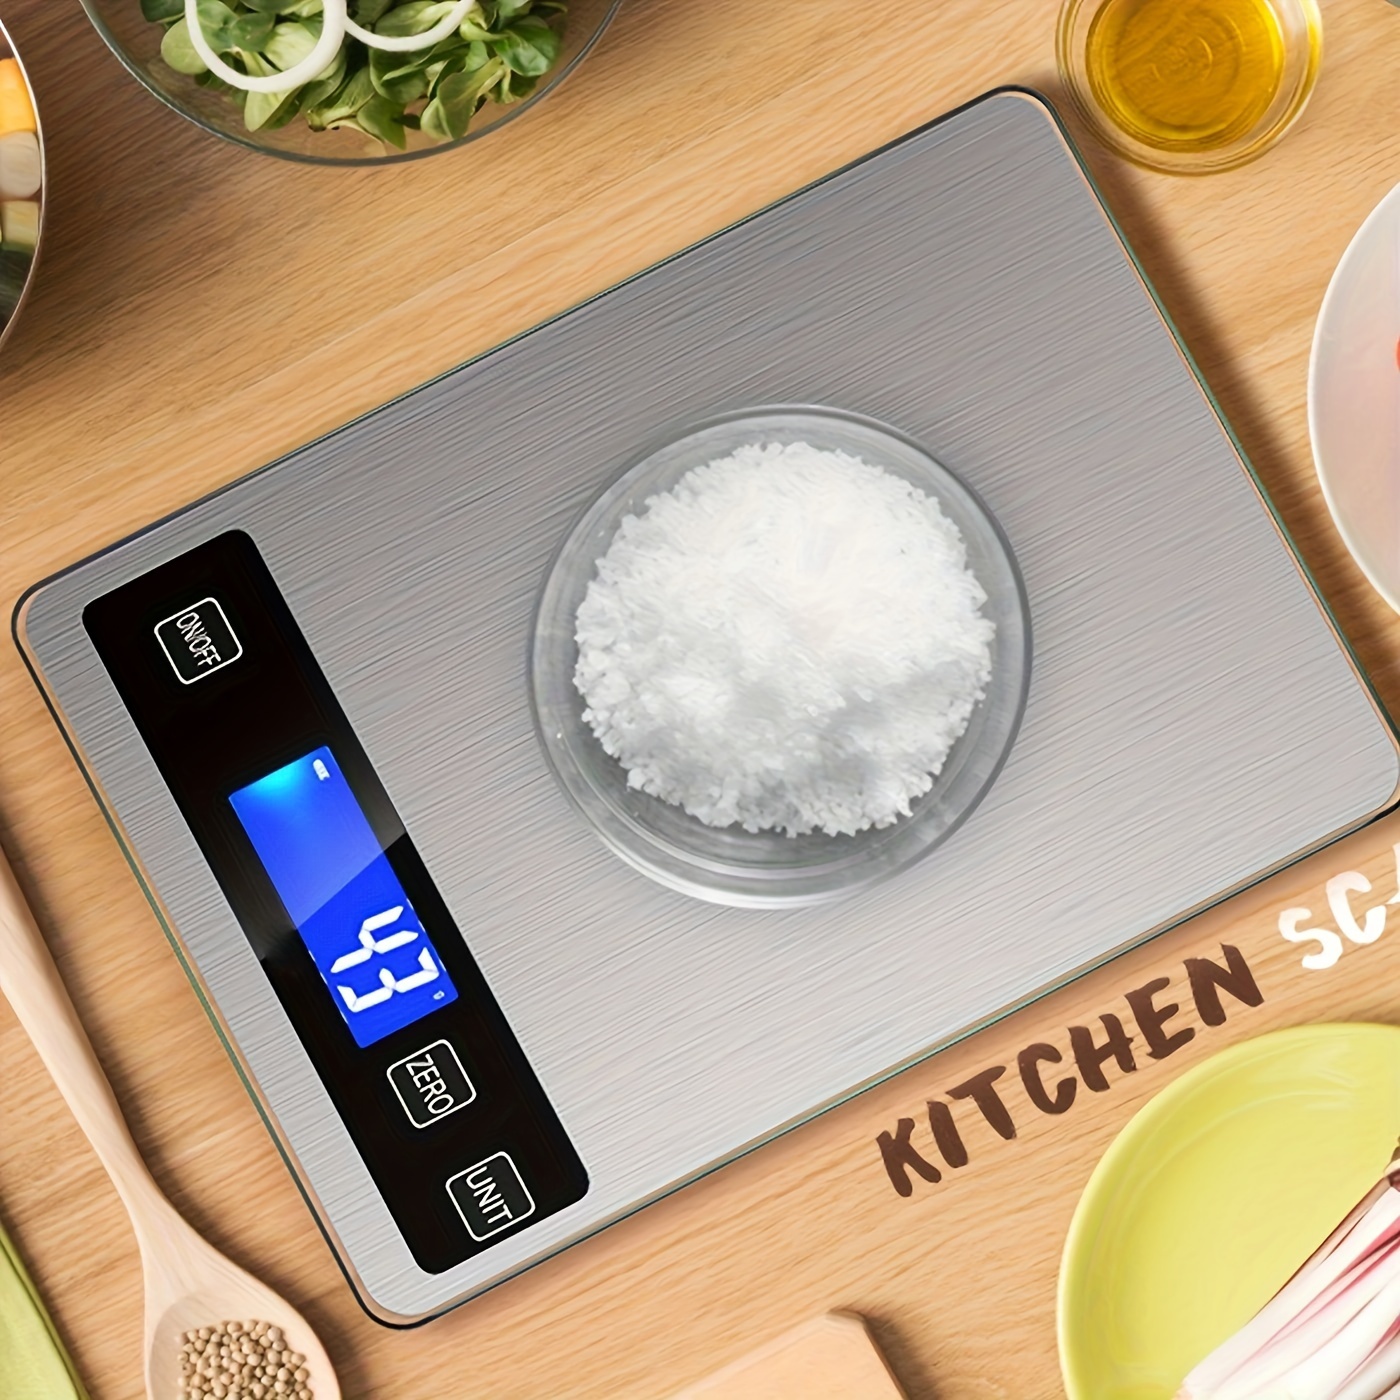  Nicewell Food Scale, 22lb Digital Kitchen Scale Weight Grams  and oz for Cooking Baking, 1g/0.1oz Precise Graduation, Stainless Steel and  Tempered Glass (Ash Silver): Home & Kitchen